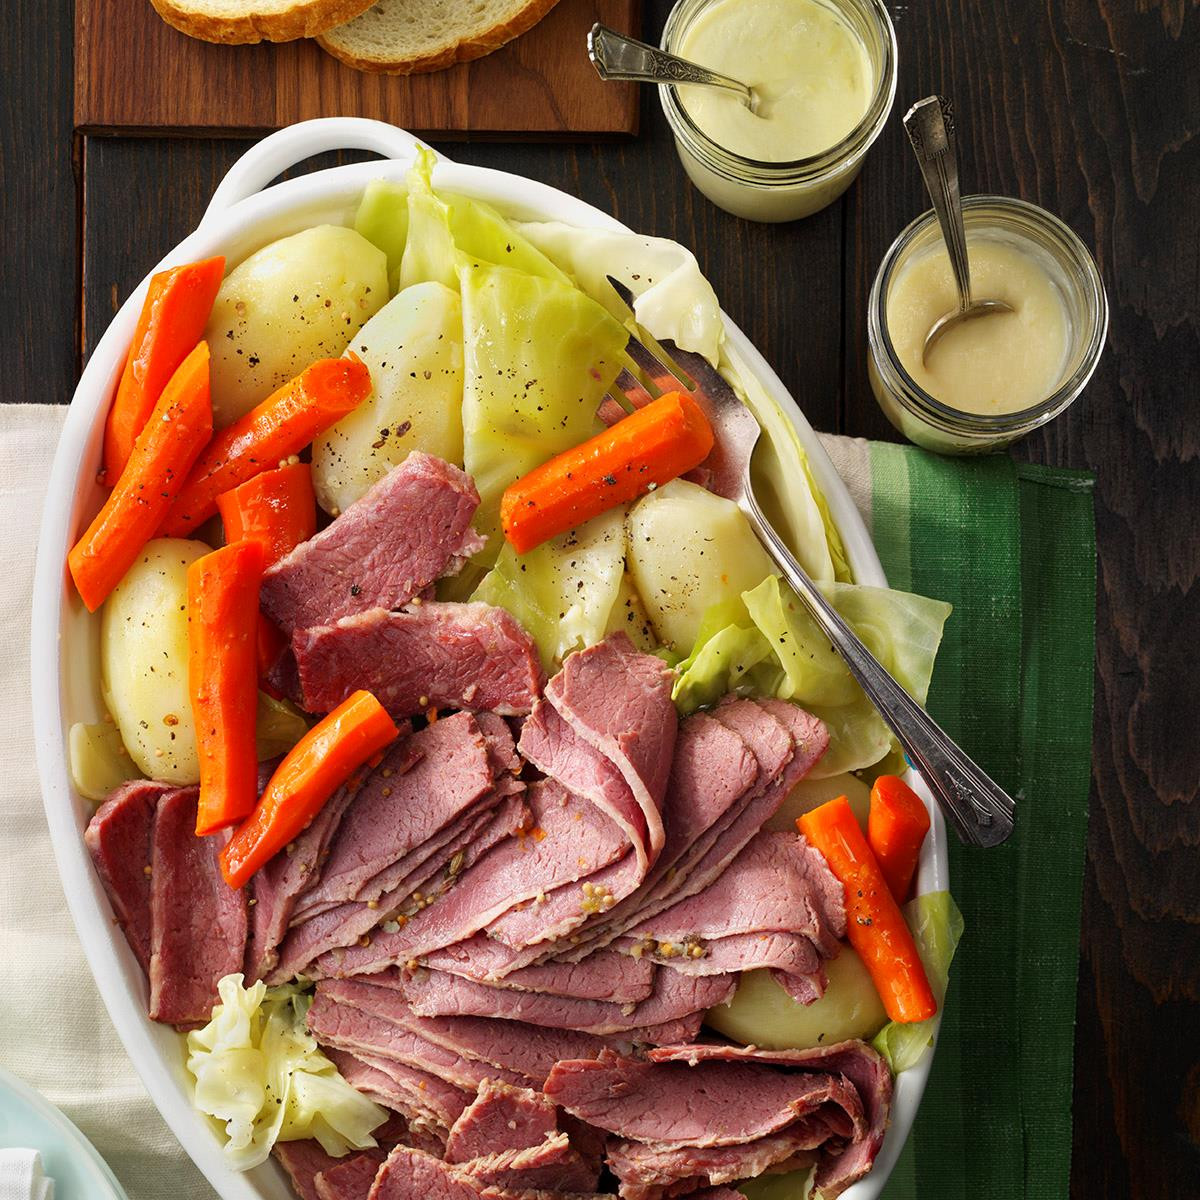 Irish Corned Beef And Cabbage
 Favorite Corned Beef and Cabbage Recipe